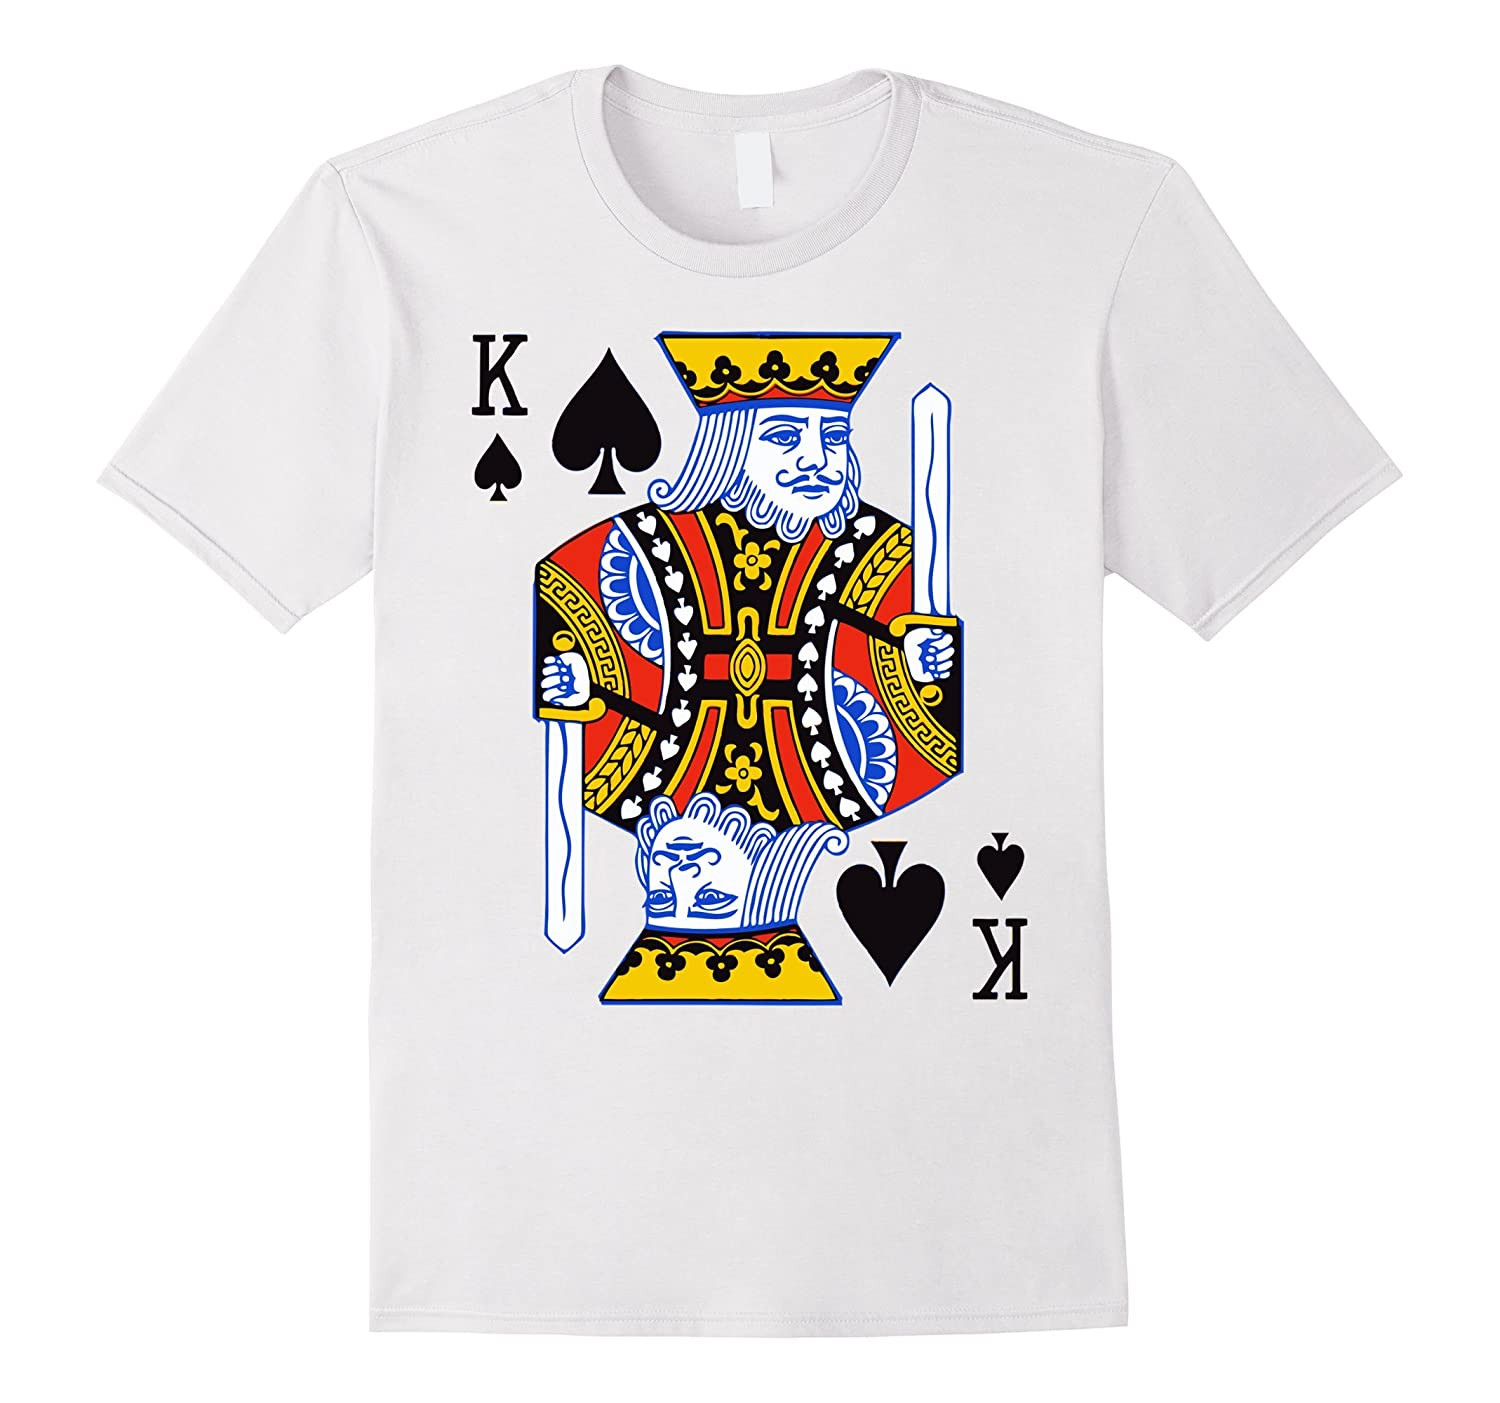 Deck Of Cards Halloween Costumes
 Deck Cards Halloween Costume King Spades Matching